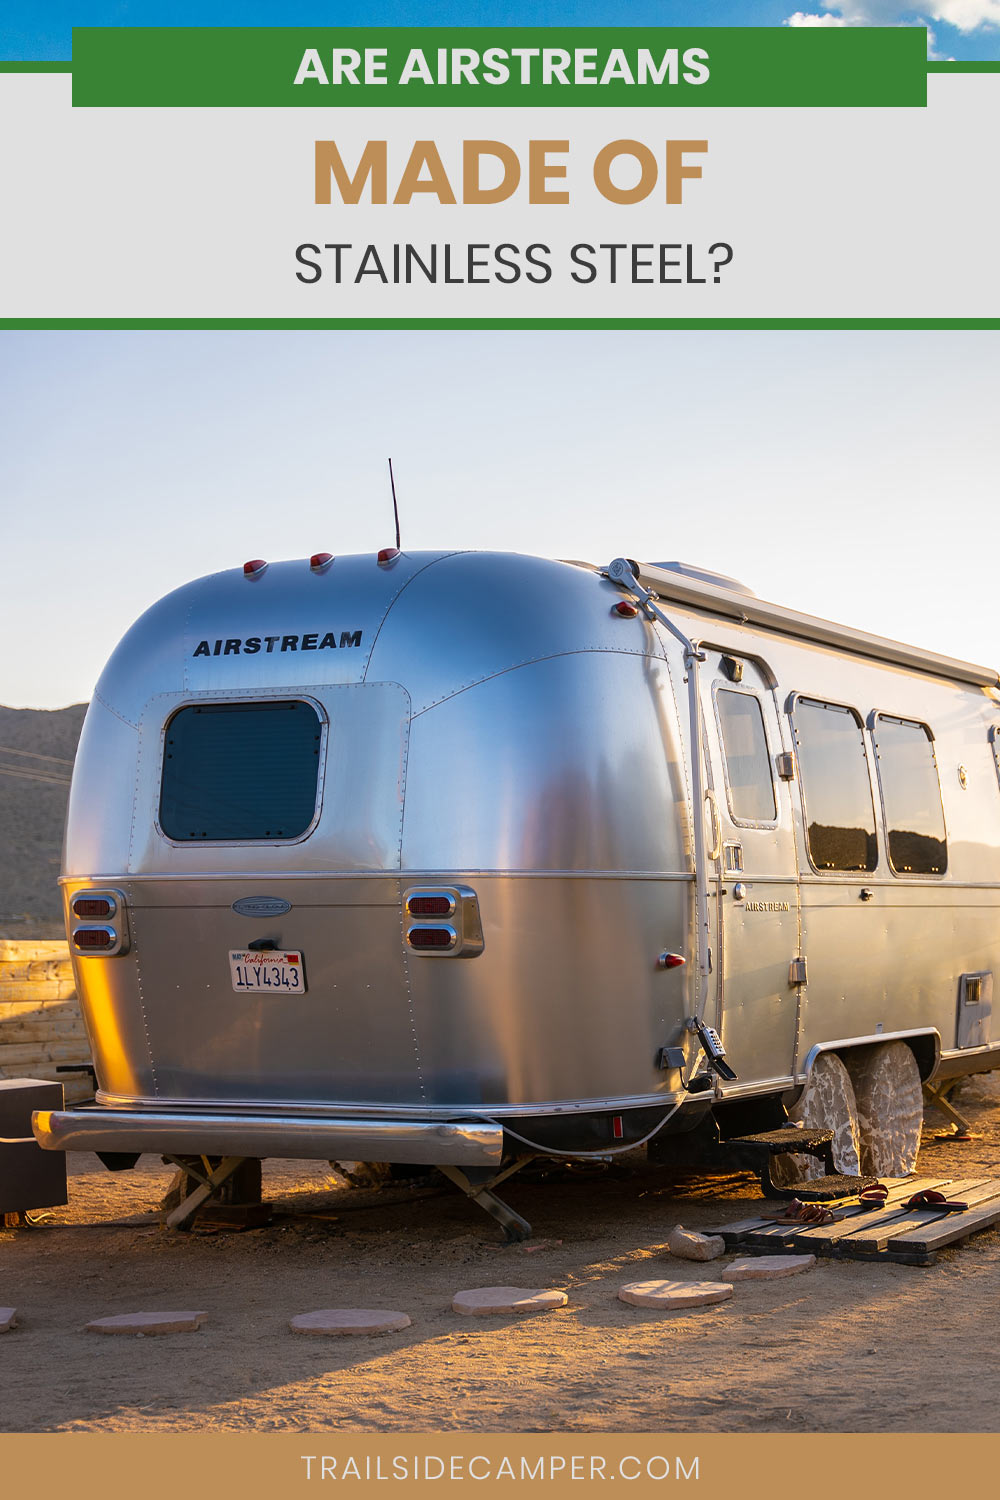 Are Airstreams Made of Stainless Steel?